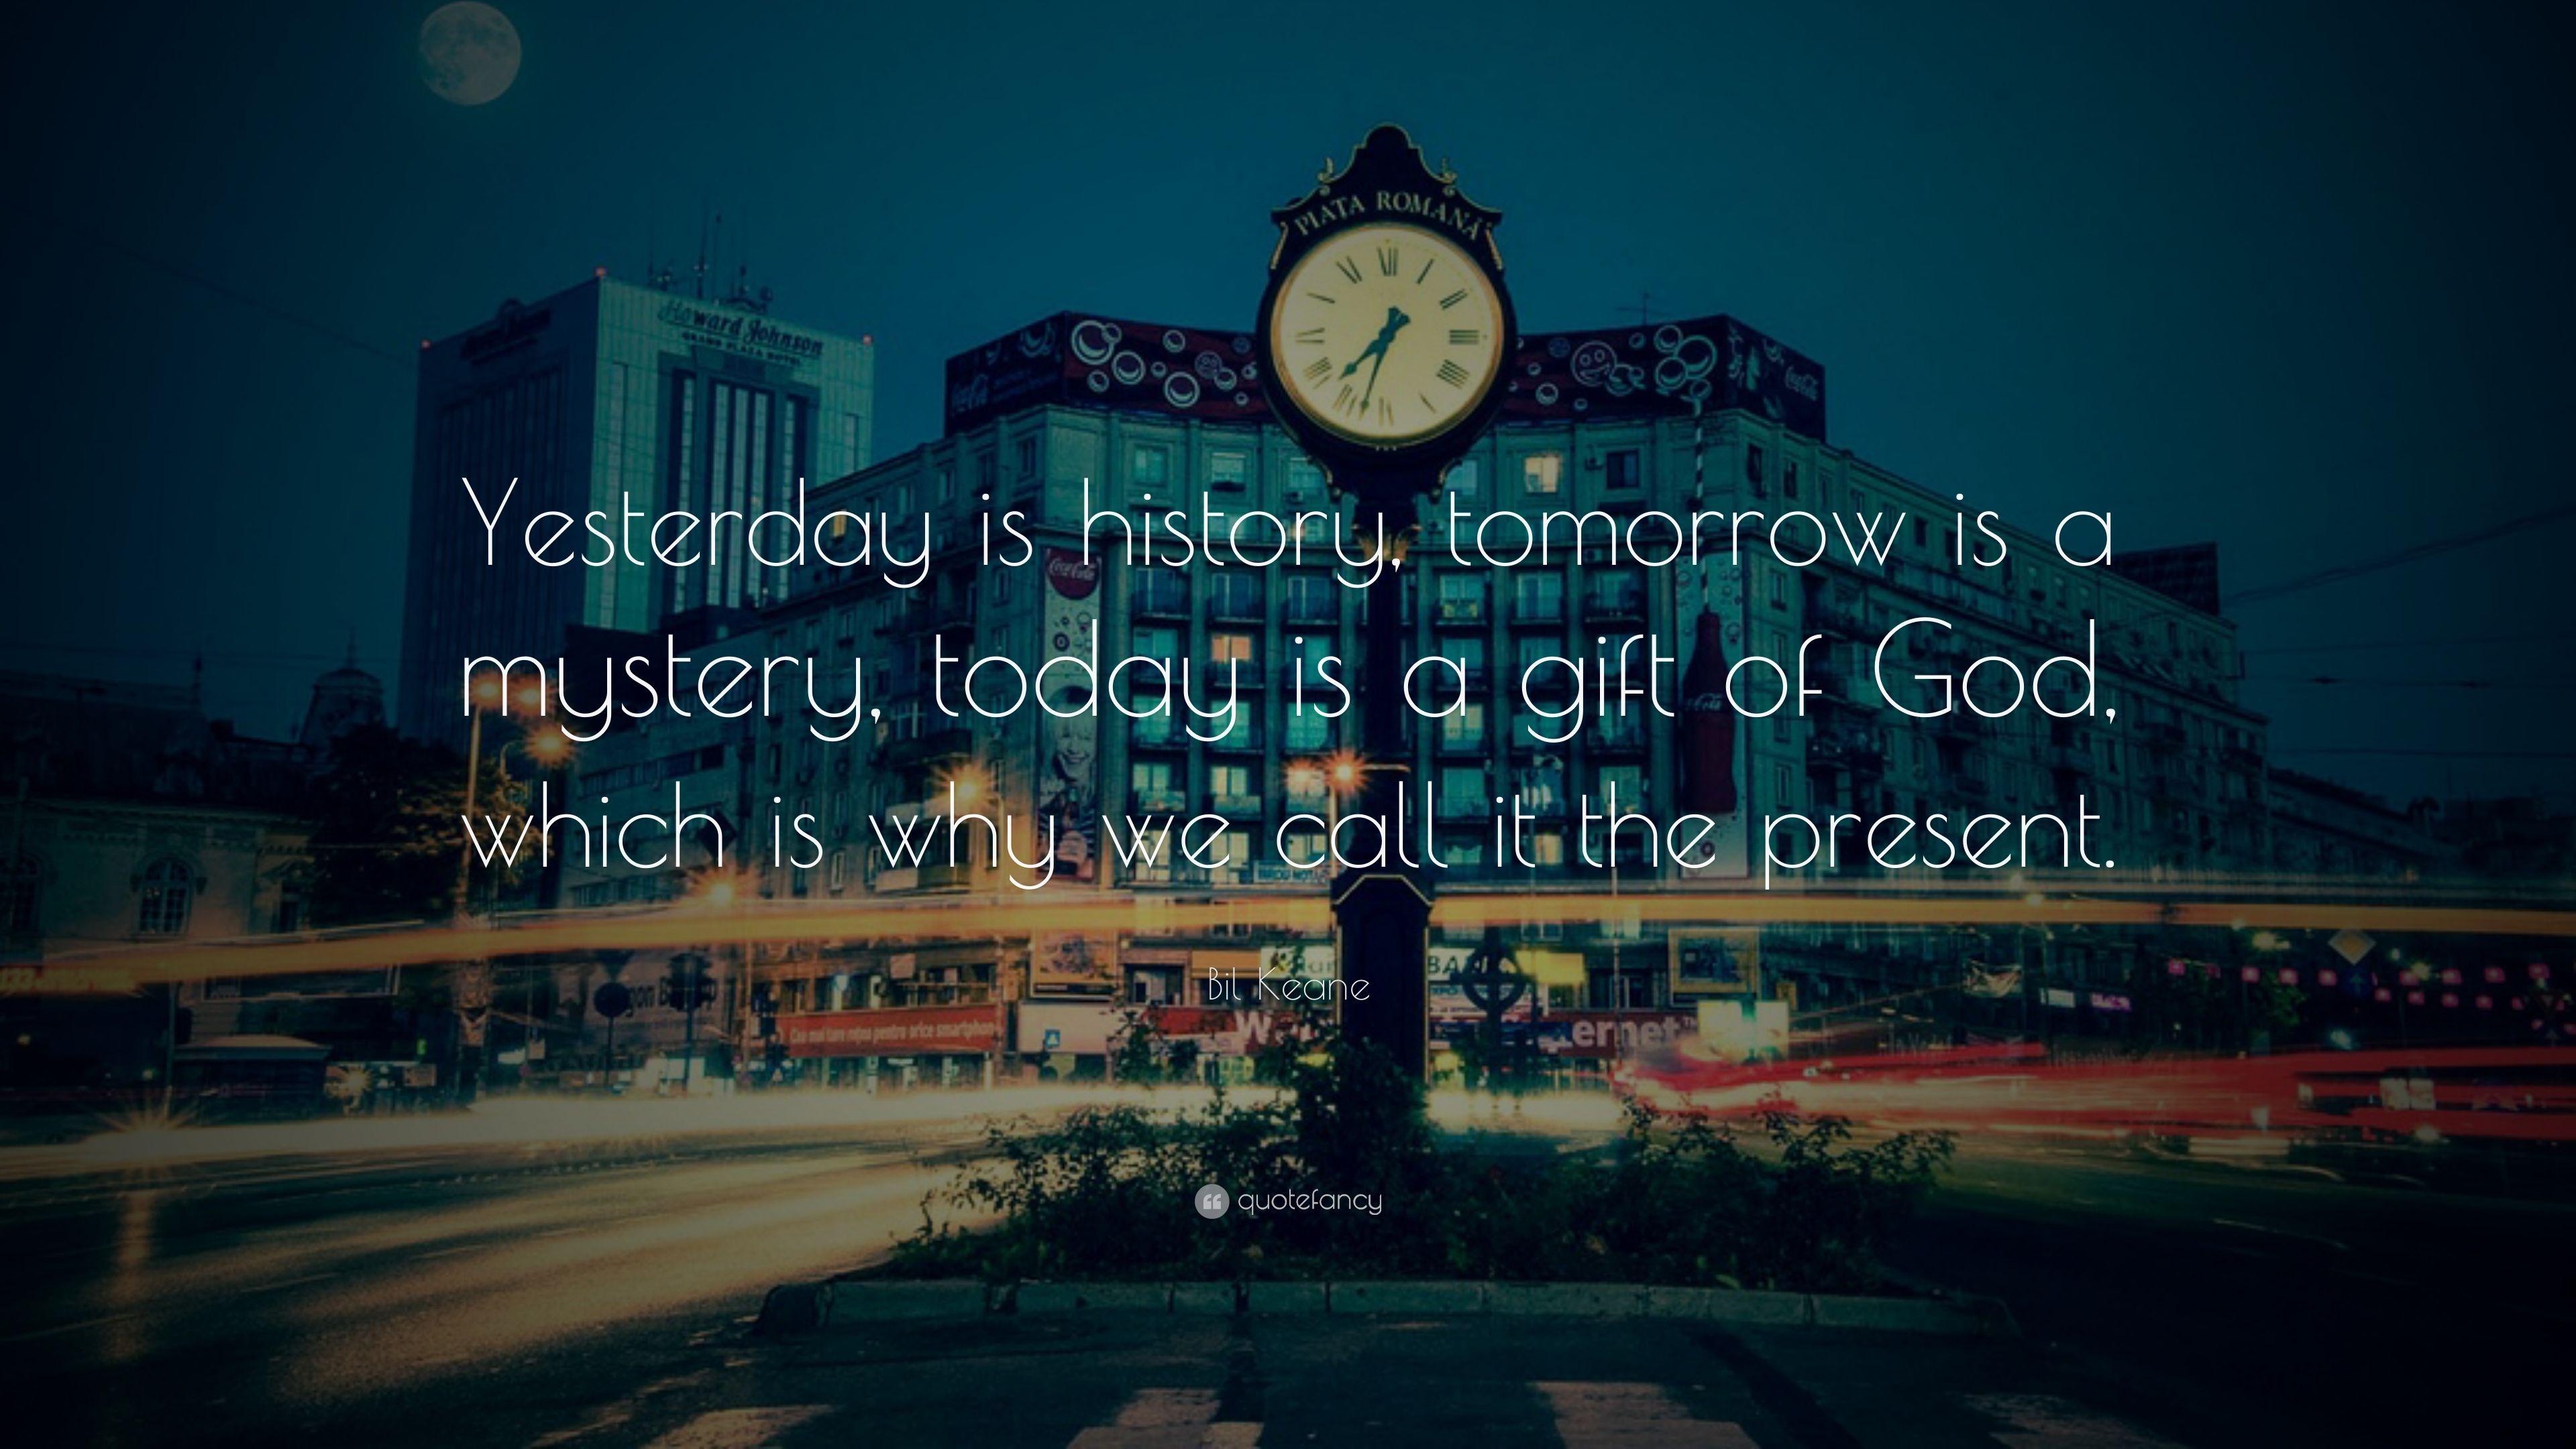 Bil Keane Quote: “Yesterday is history, tomorrow is a mystery